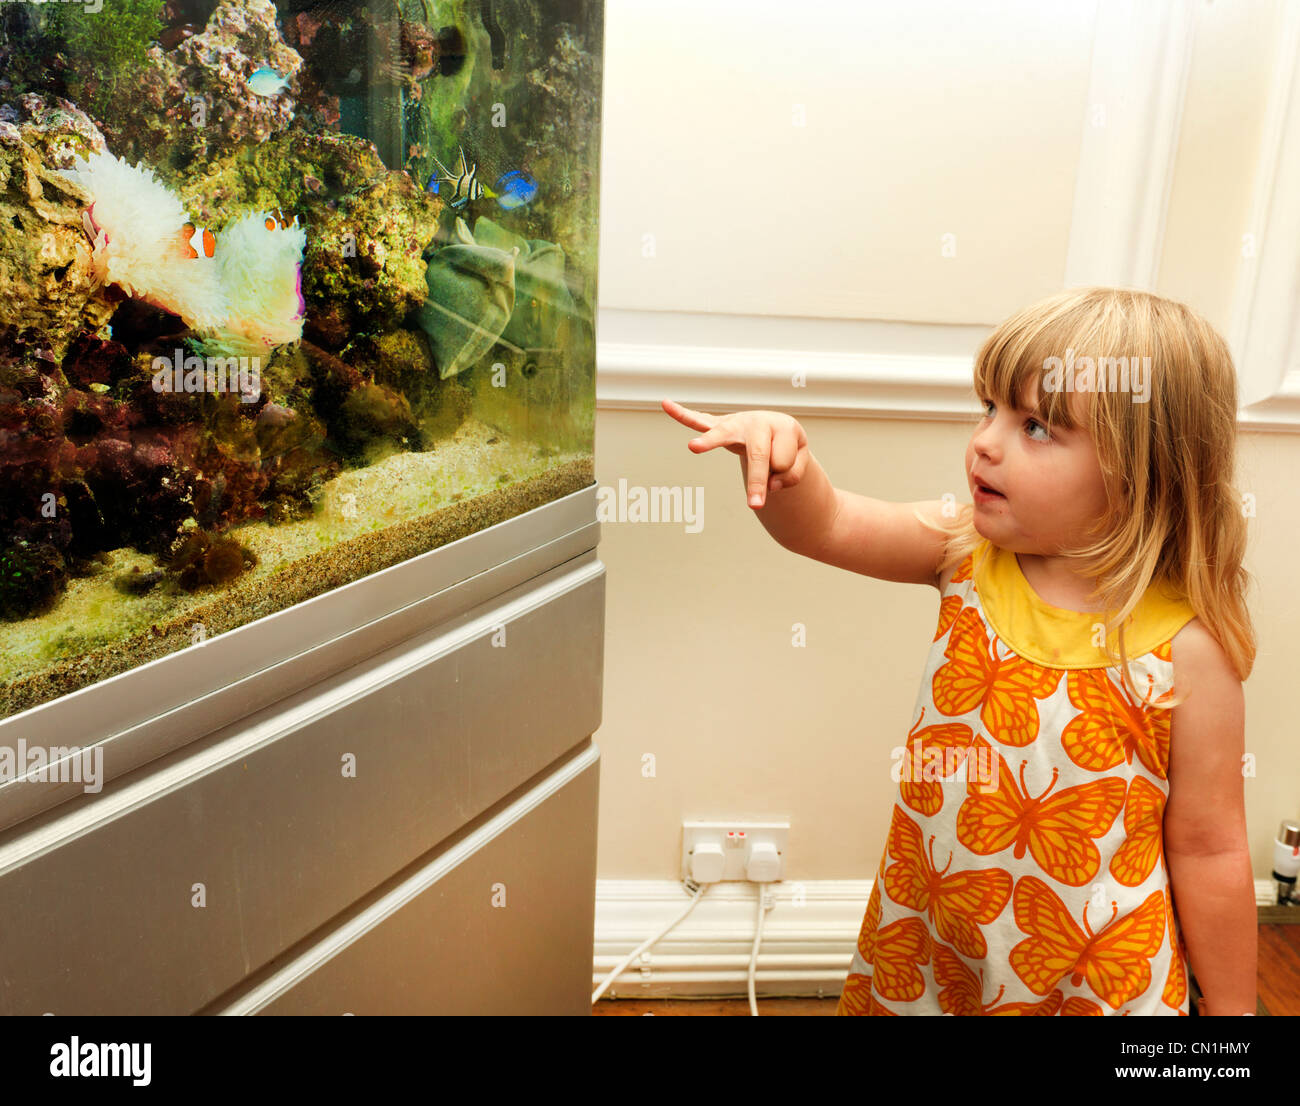 Young Girl Looking A Fish In Saltwater Fish Tank Pointing At Fish Stock Photo